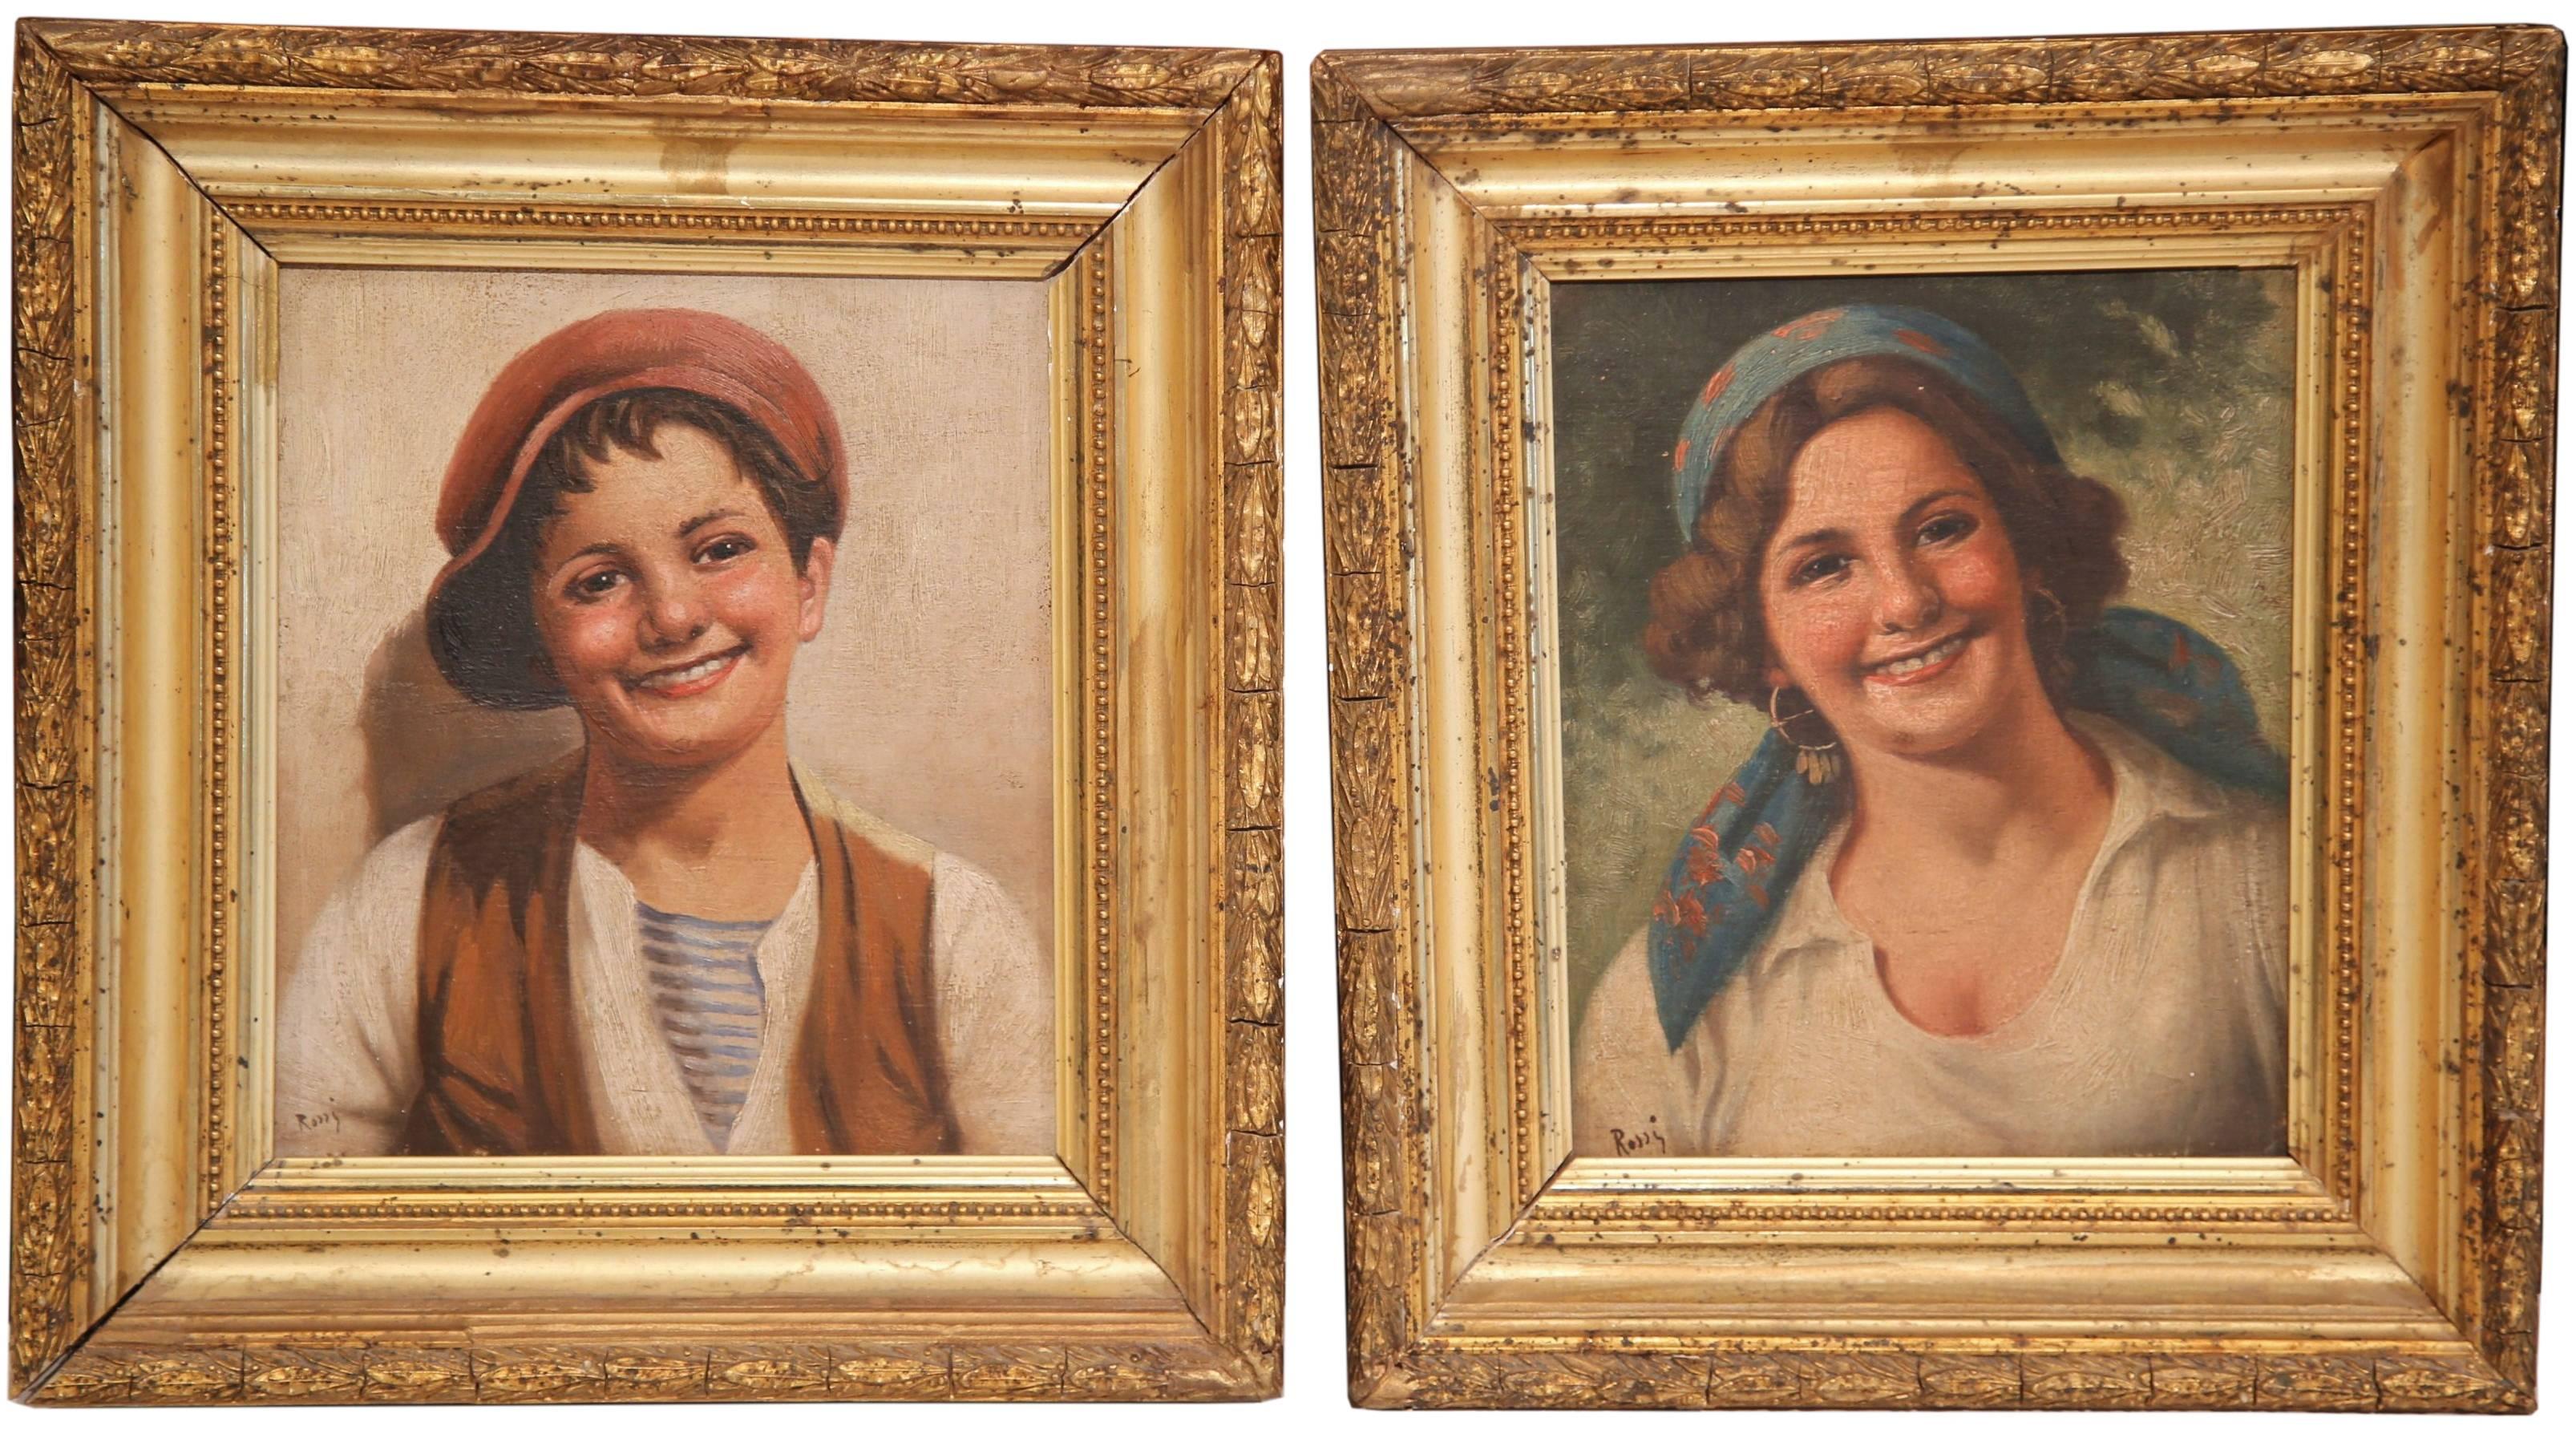 Unknown Portrait Painting - Pair of 19th Century Italian Portraits Paintings in Gilt Frames Signed Rossi